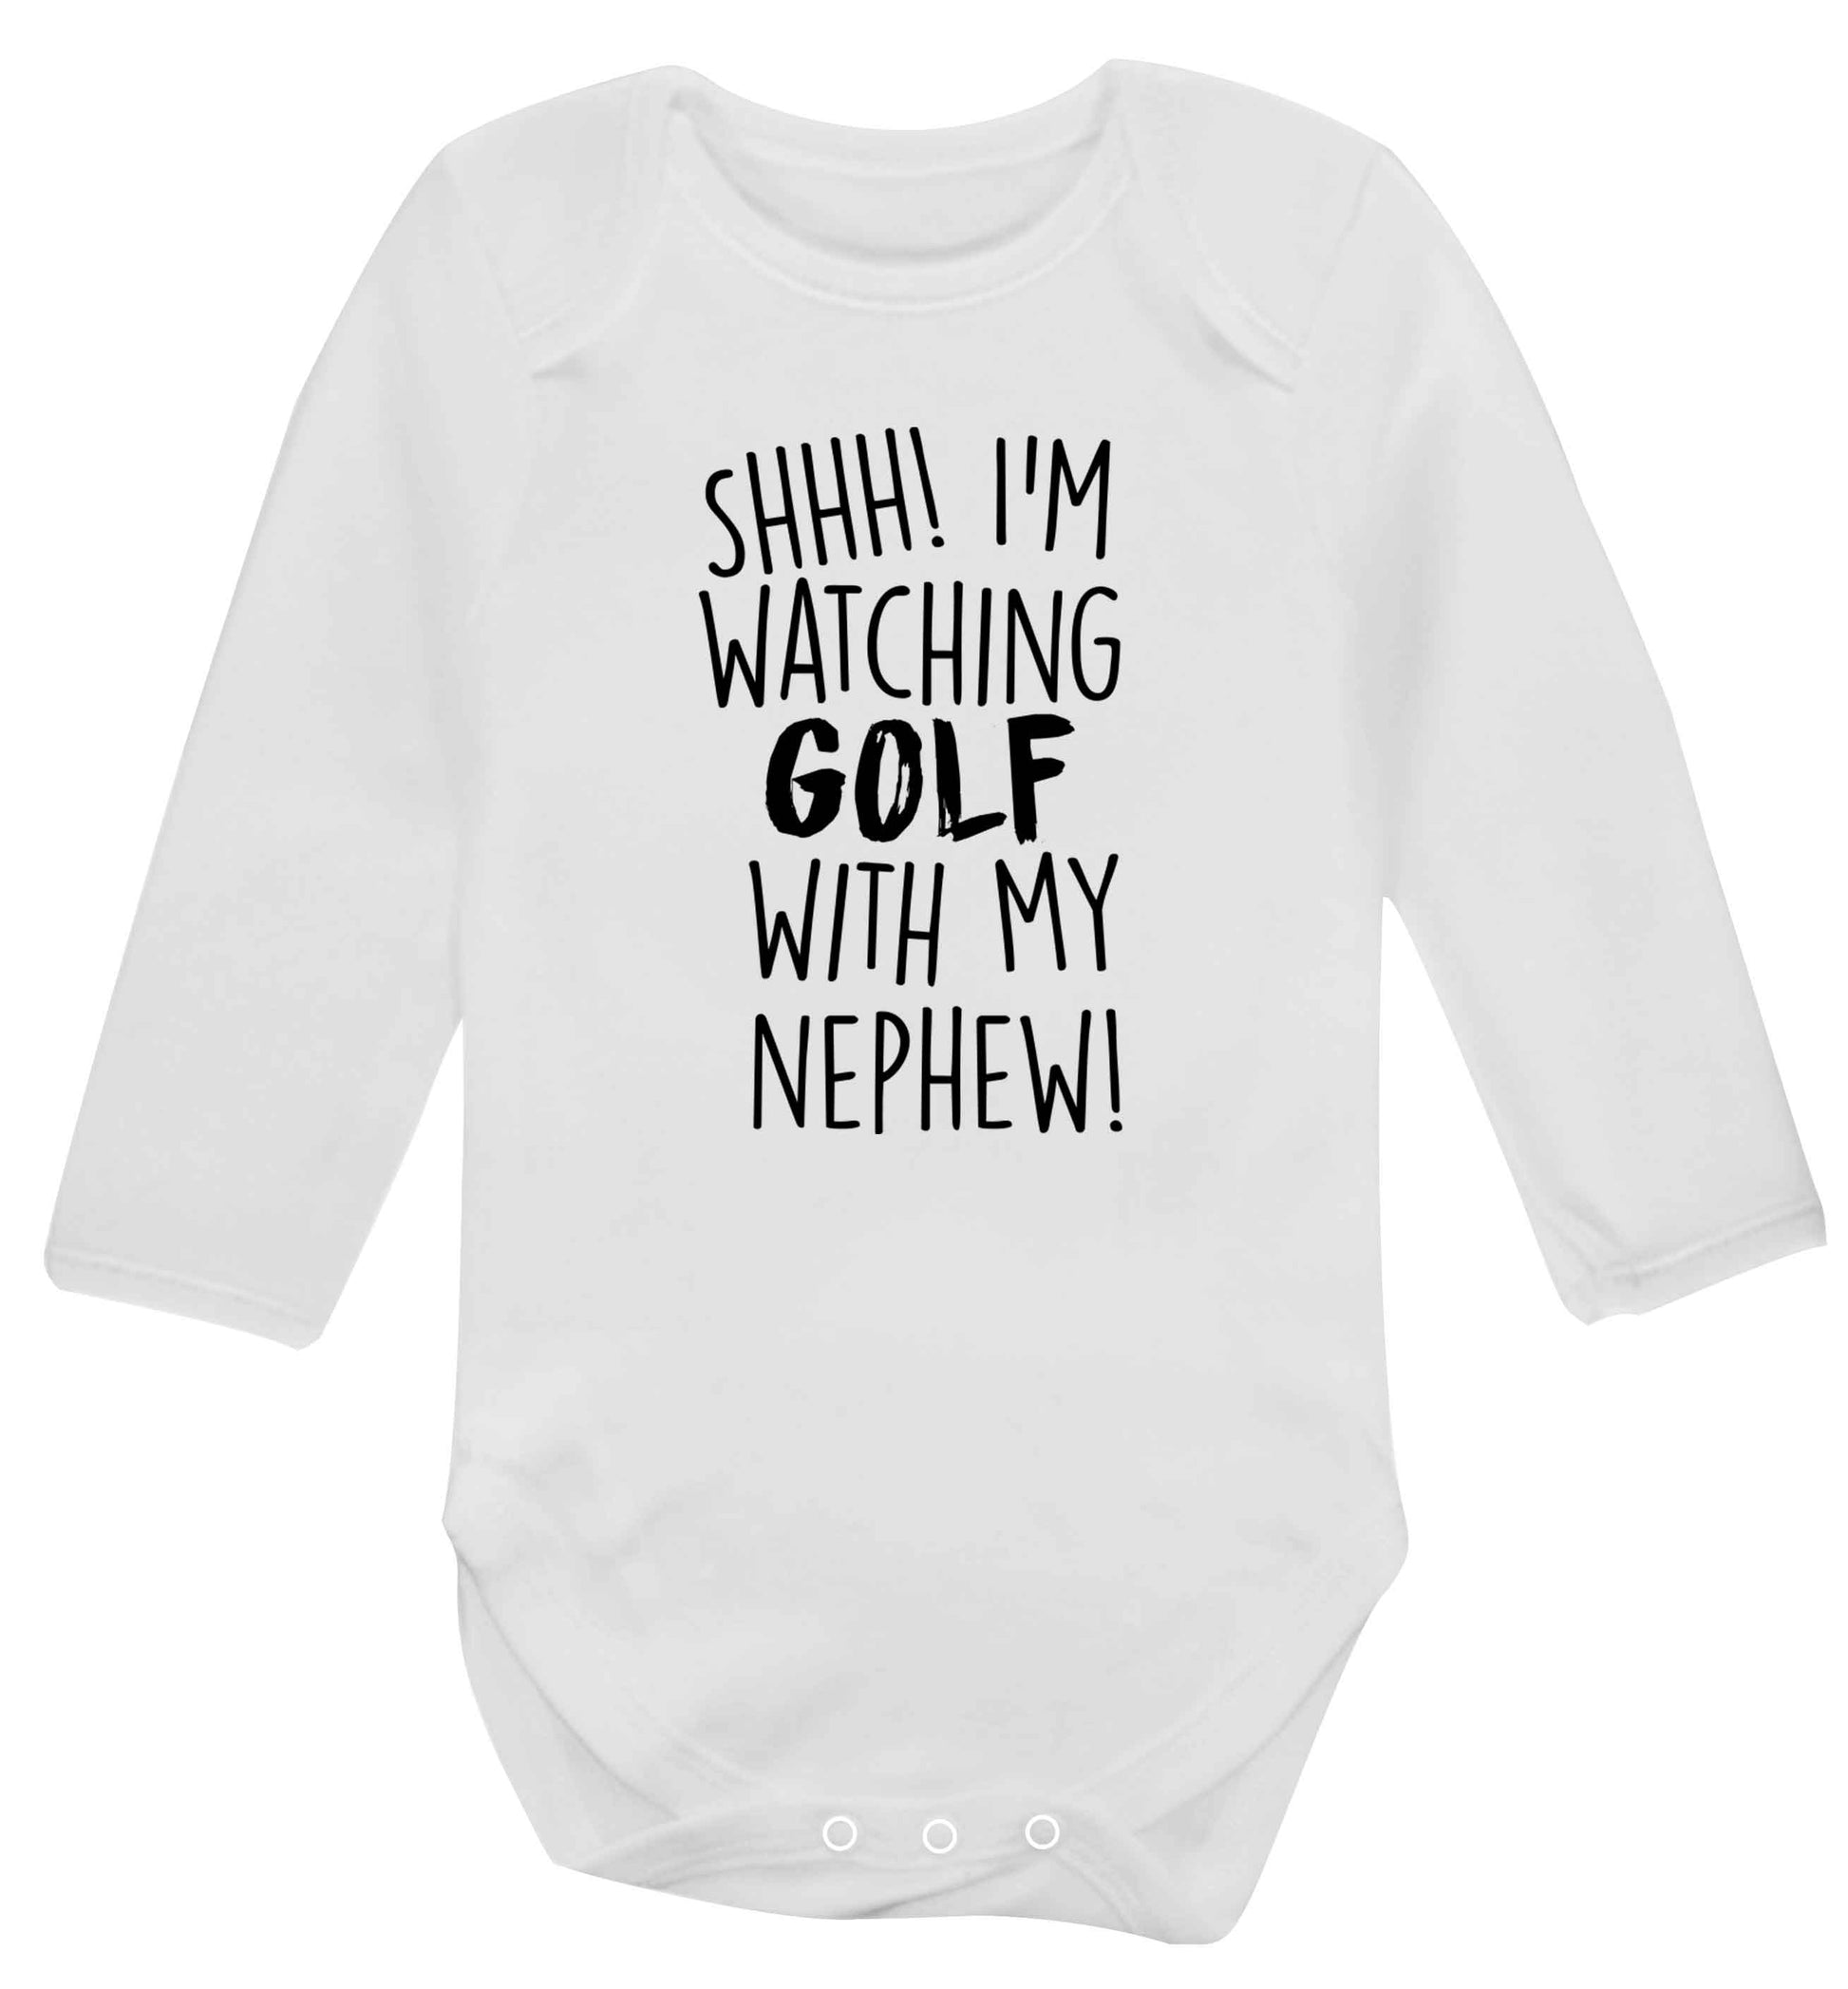 Shh I'm watching golf with my nephew Baby Vest long sleeved white 6-12 months